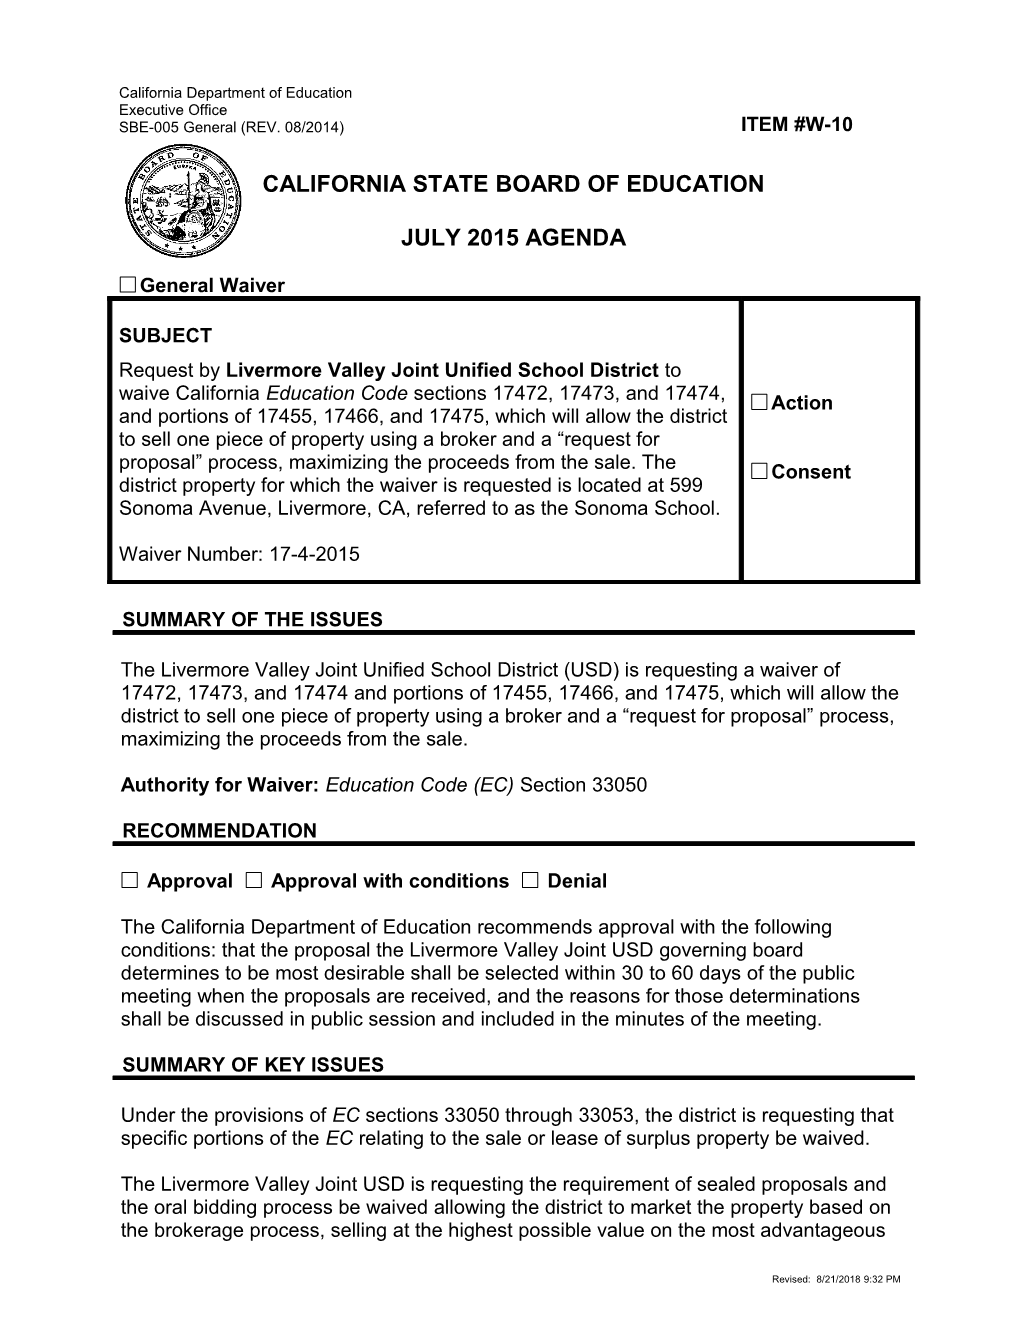 July 2015 Waiver Item W-10 - Meeting Agendas (CA State Board of Education)